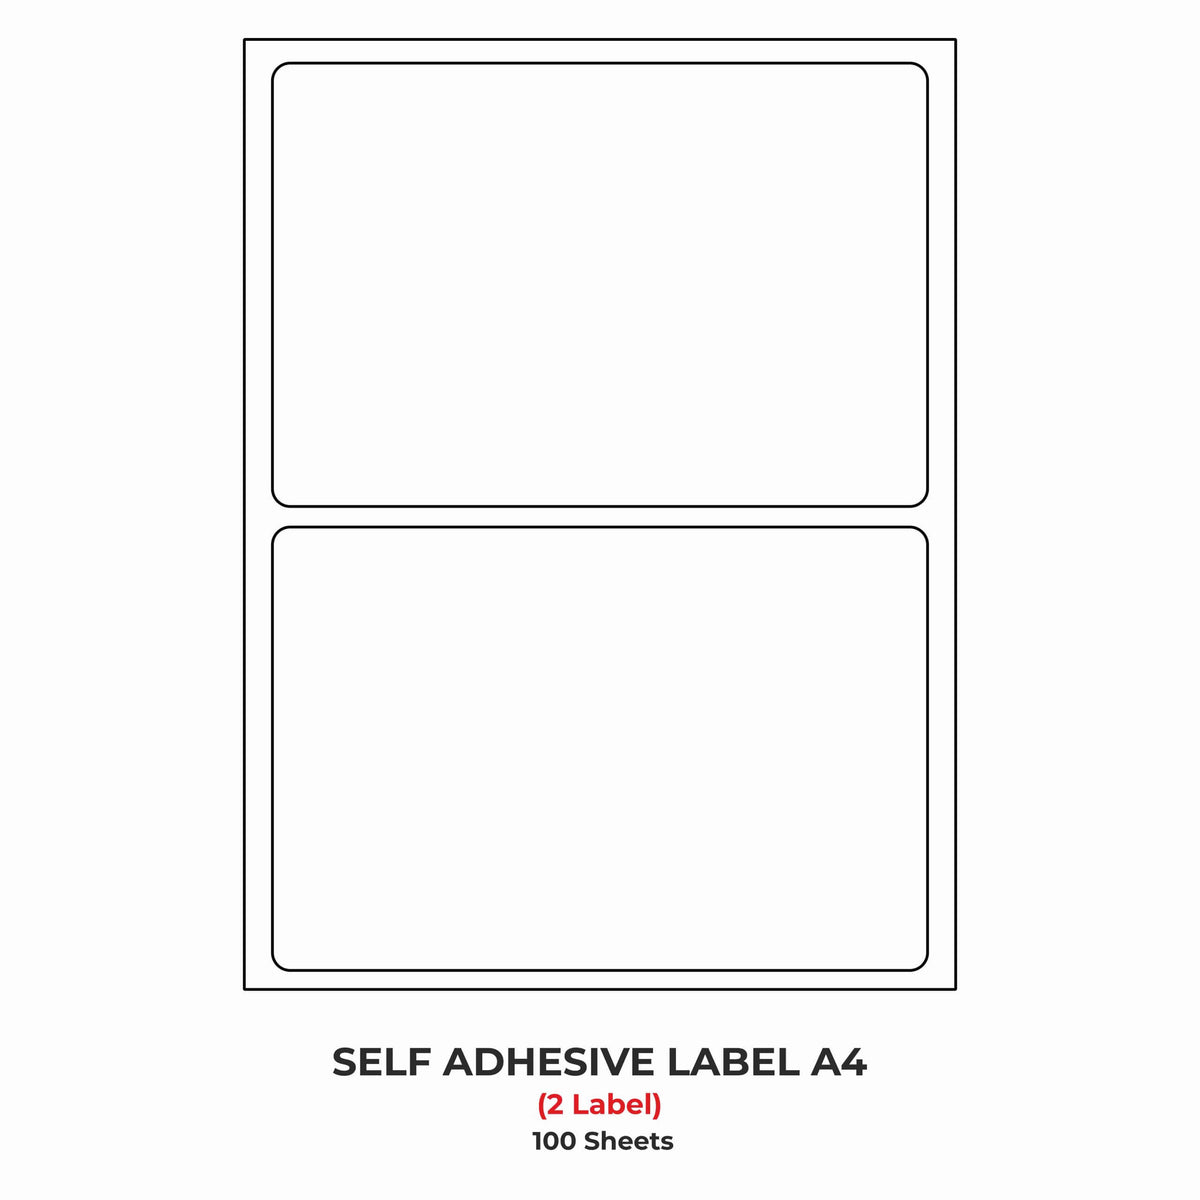 A4 (ST2) Shipping Label (100mm x 143mm x 2) (Self Adhesive Label for Inkjet/Copier/Laser Printer)